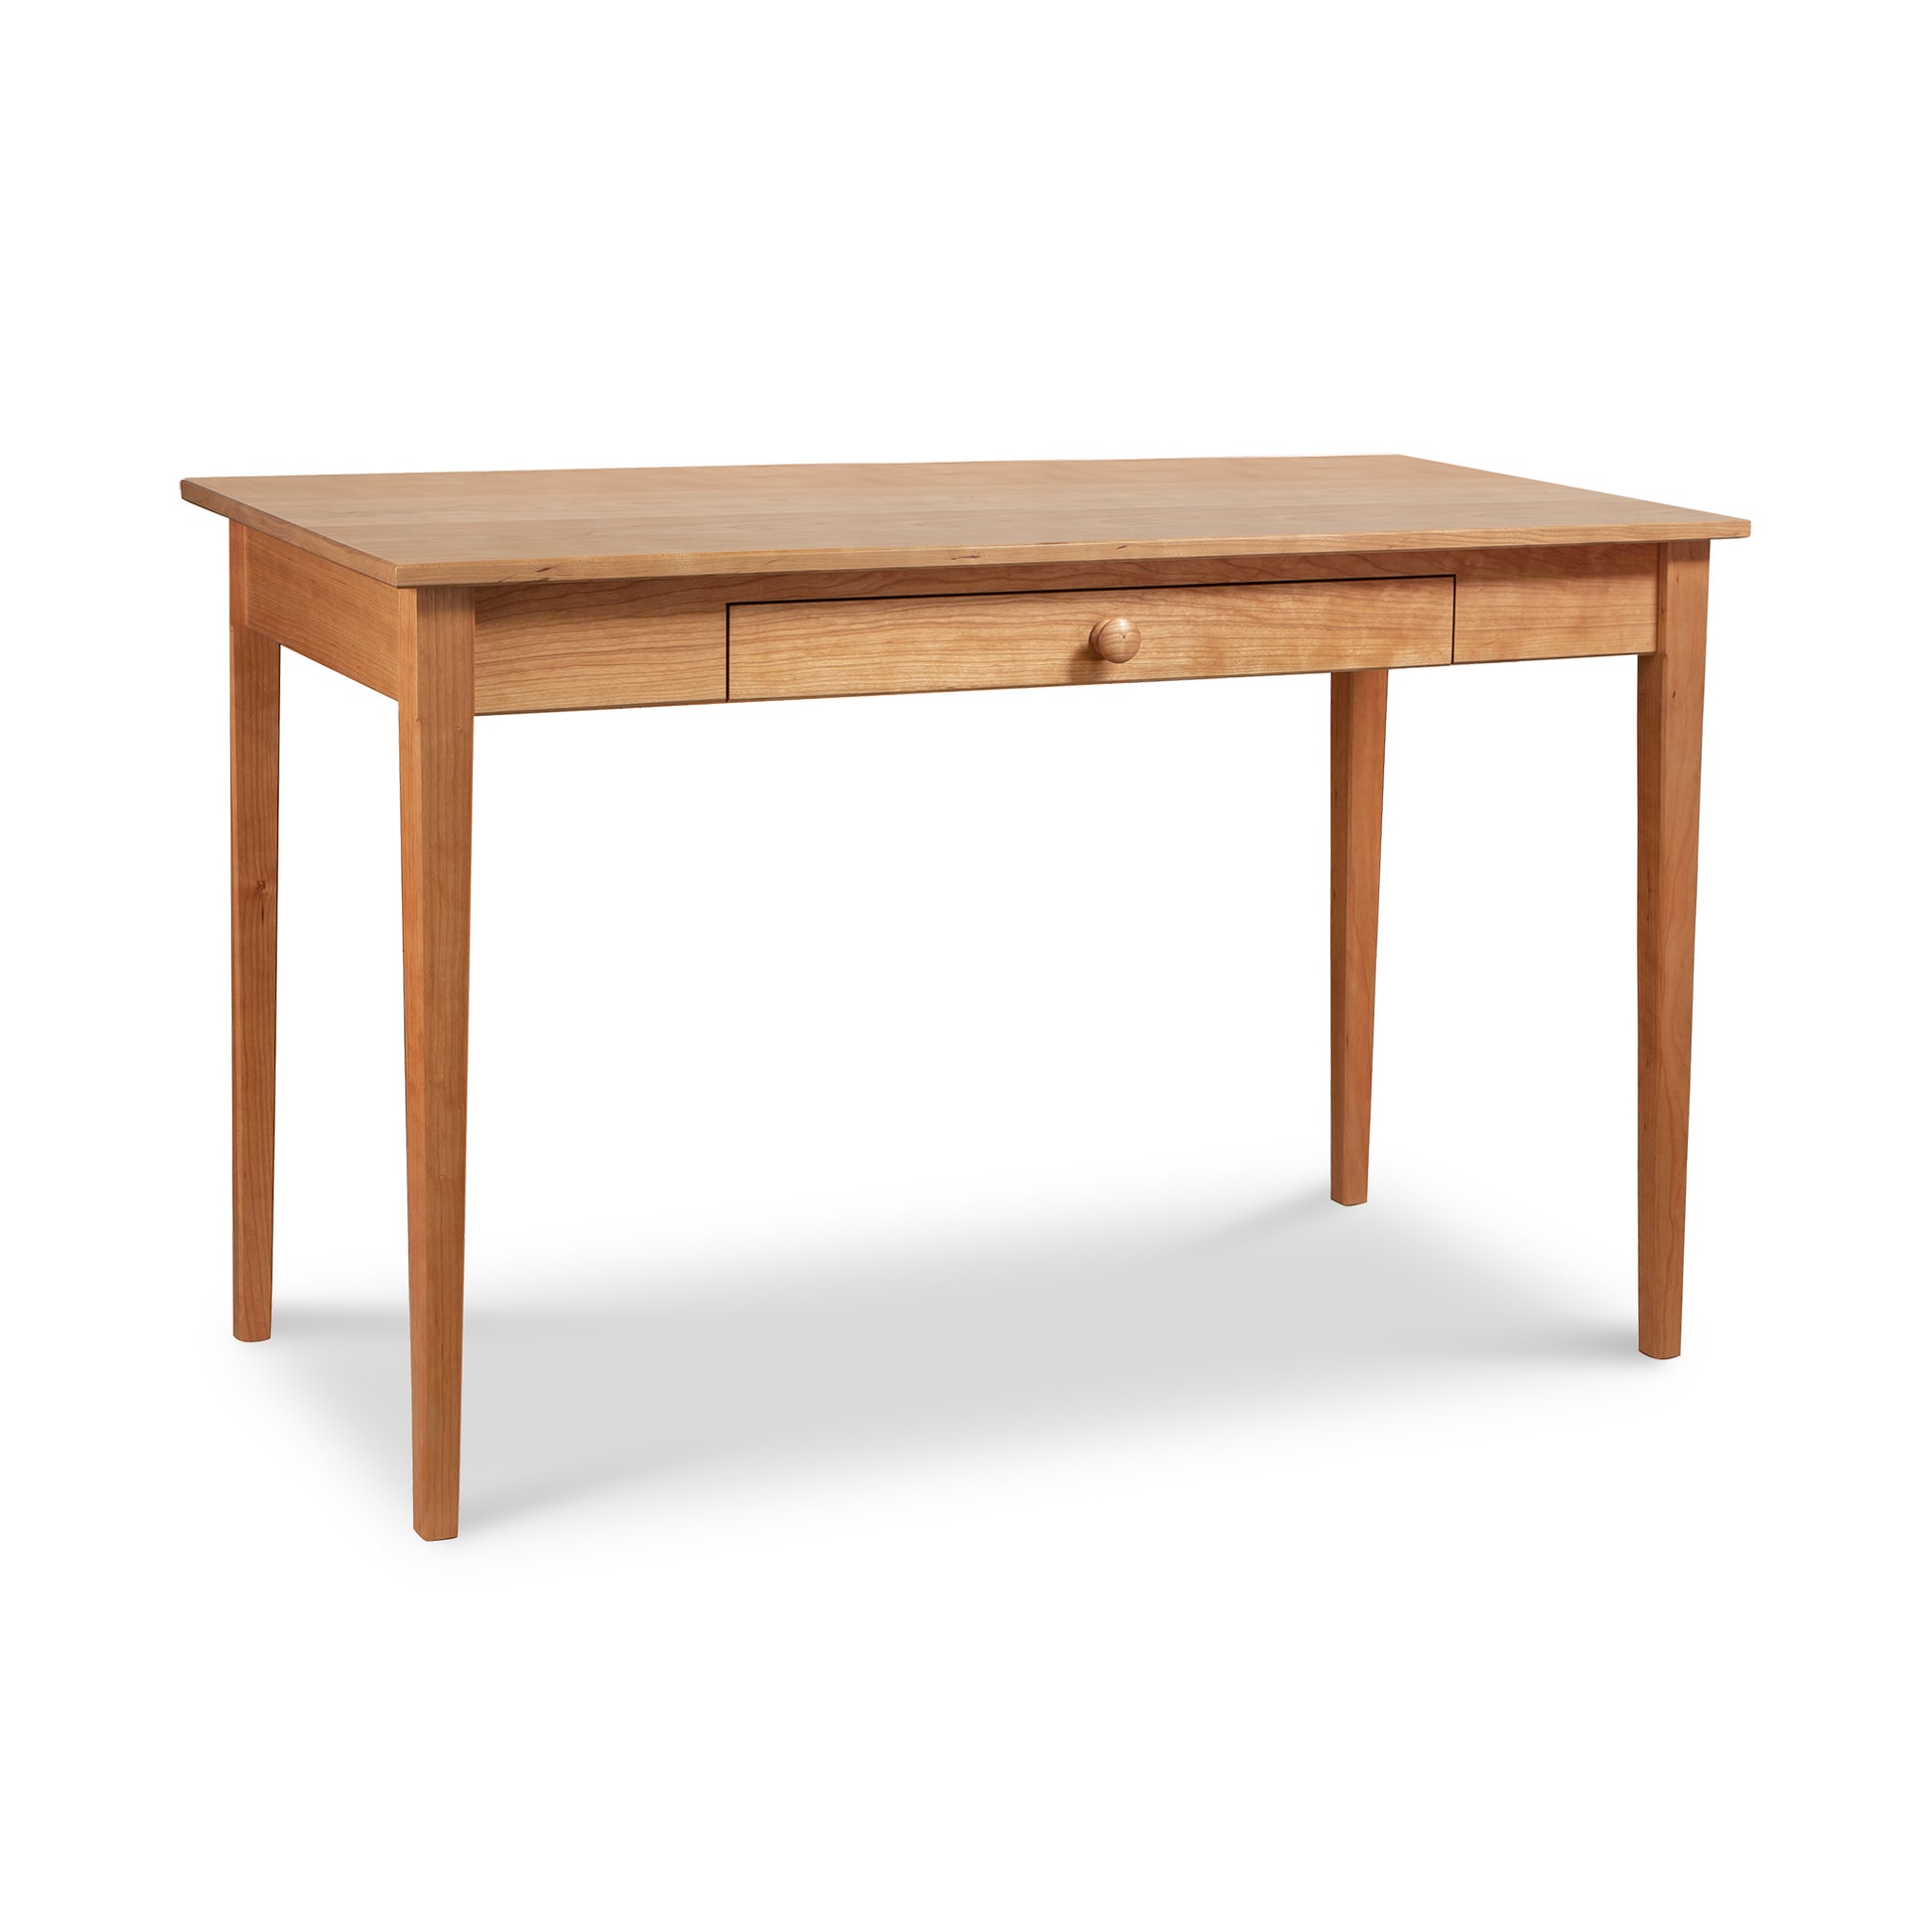 An eco-friendly Maple Corner Woodworks Vermont Shaker Writing Desk made with solid wood construction, featuring a convenient drawer.